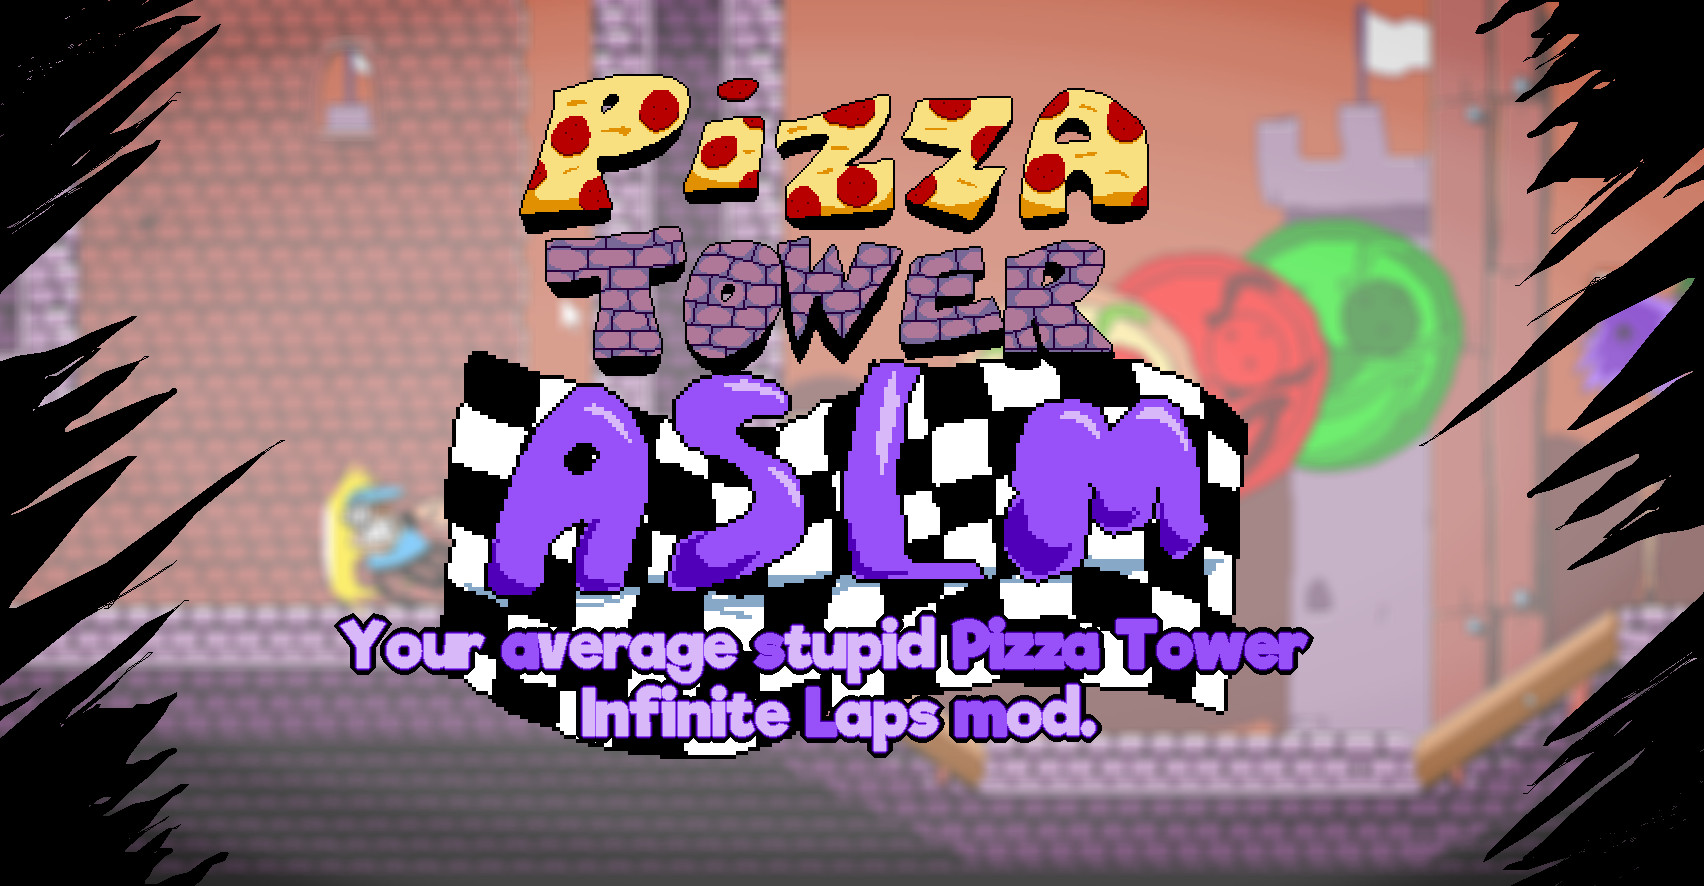 I'm playing pizza tower for the first time!